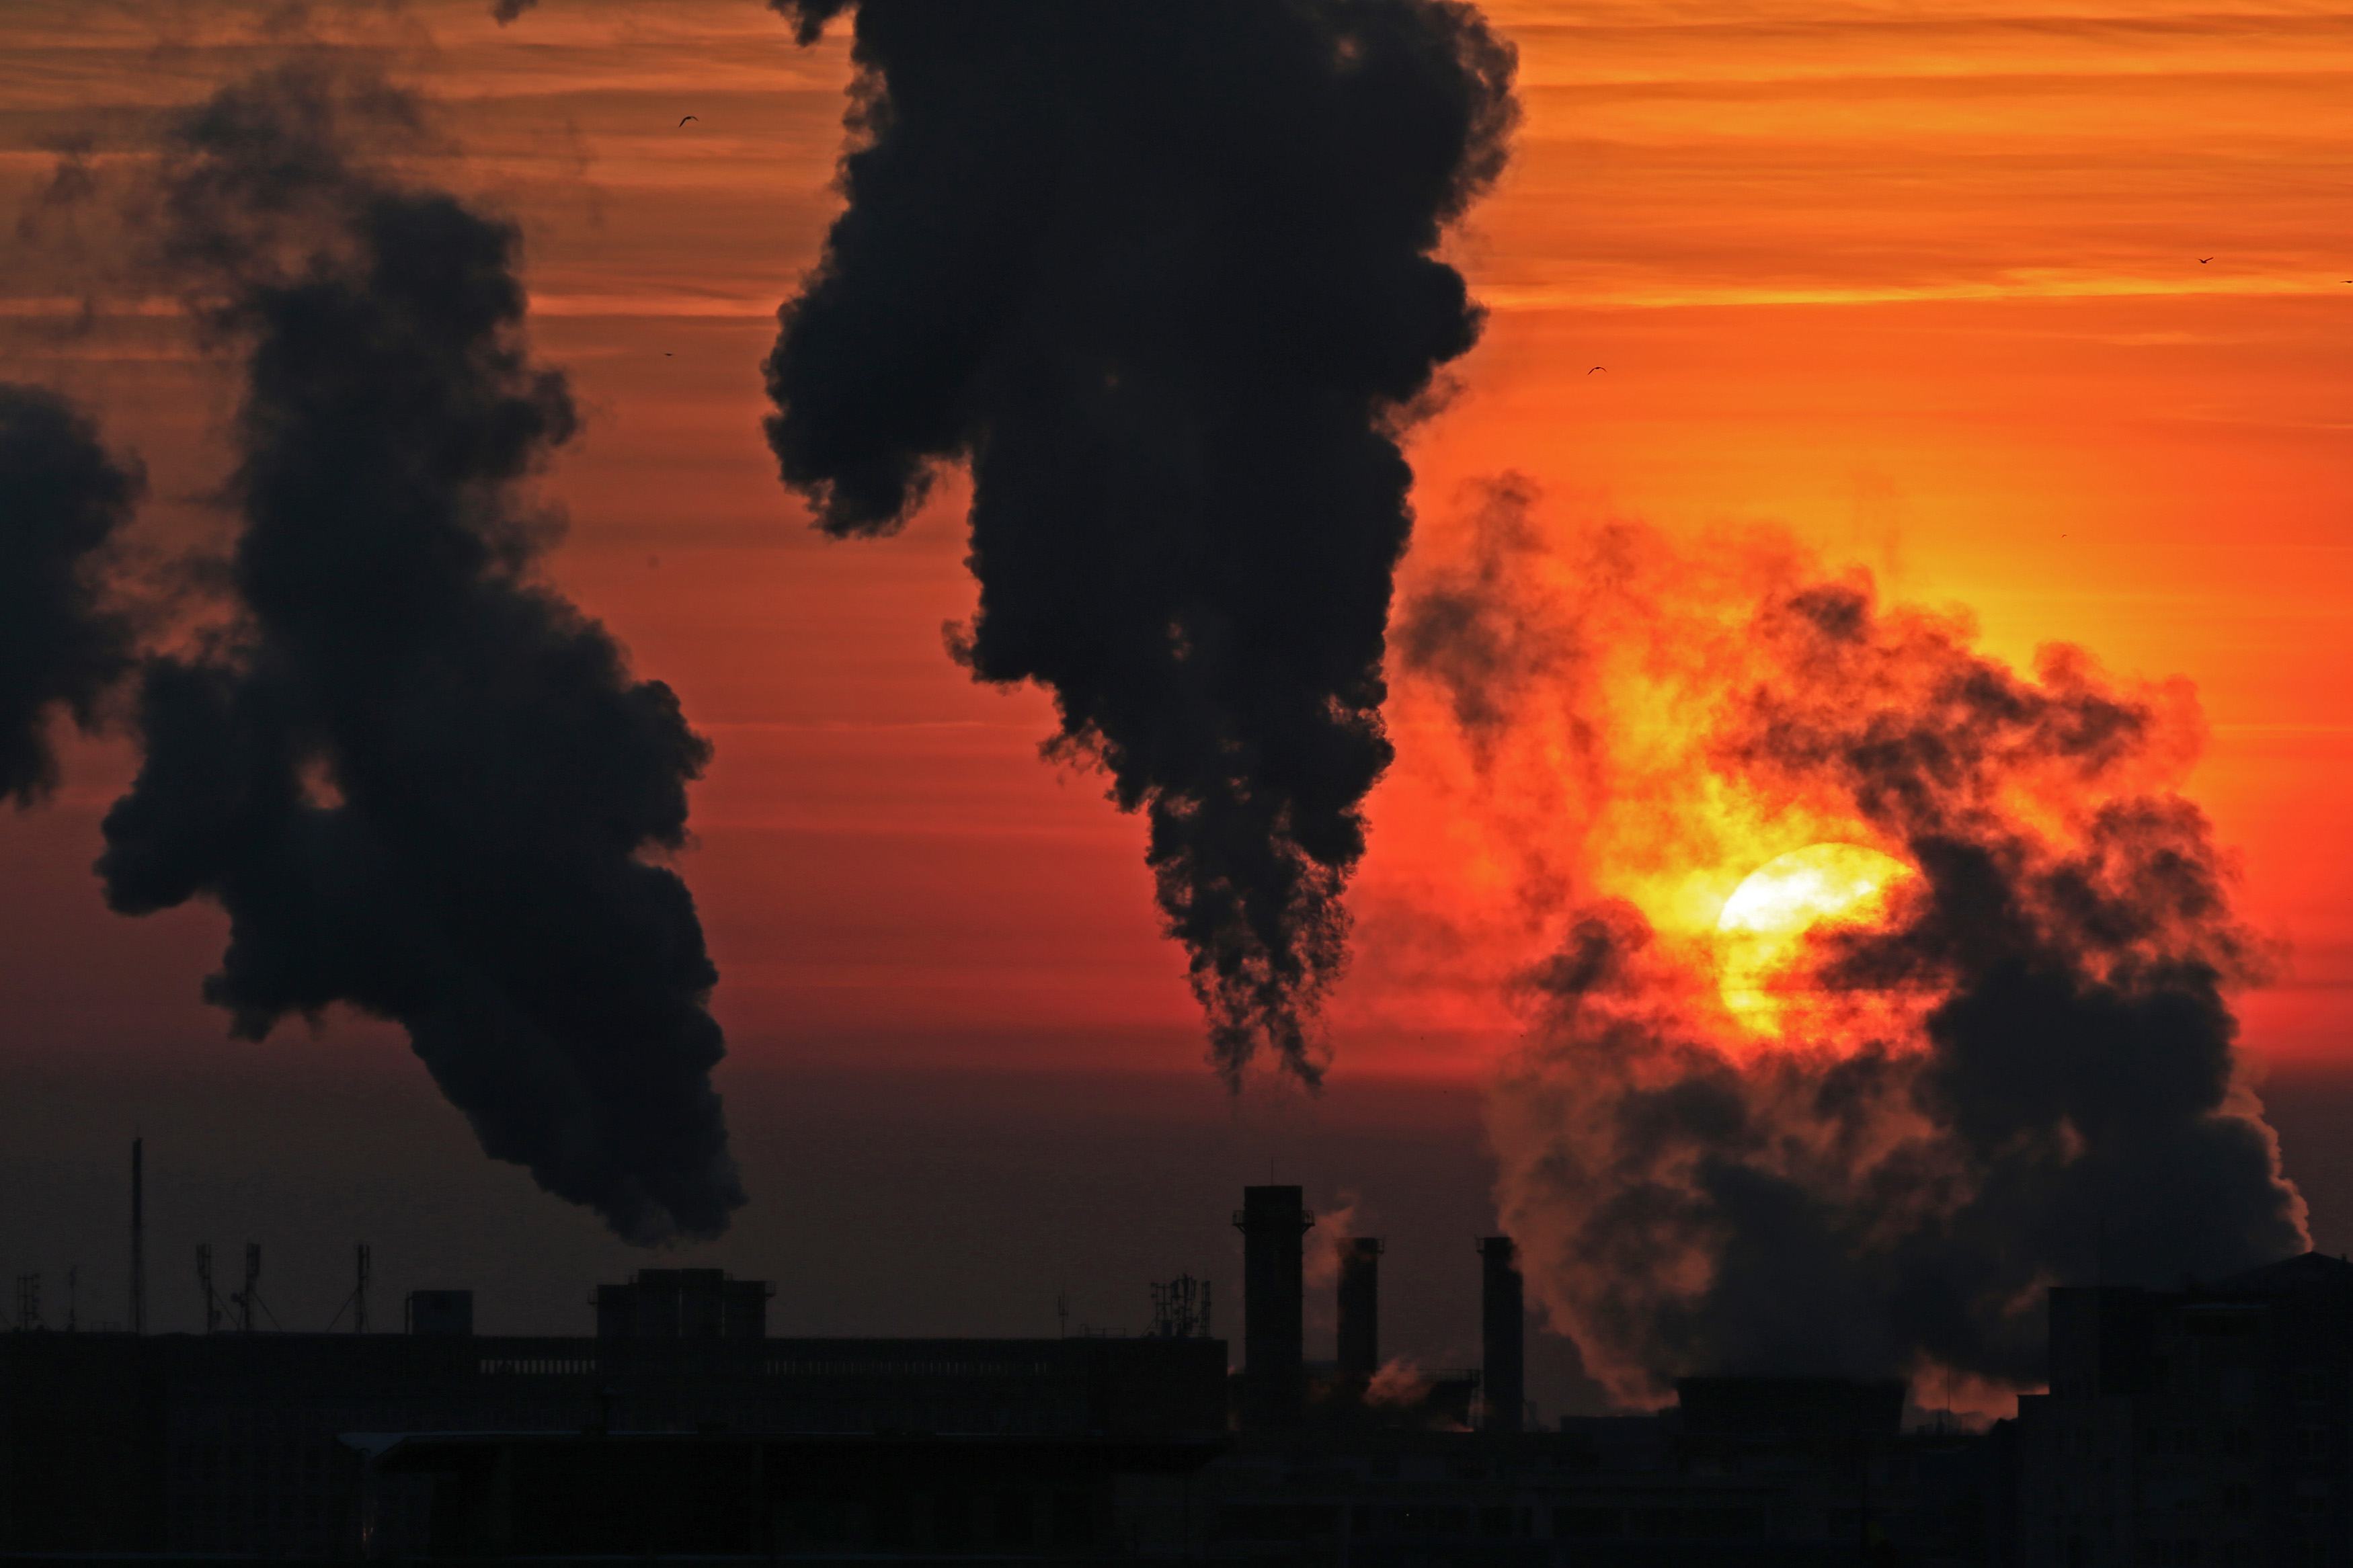 Steam from one of the city's heating power plants rises in the cold air as the sun sets at dusk in Bucharest